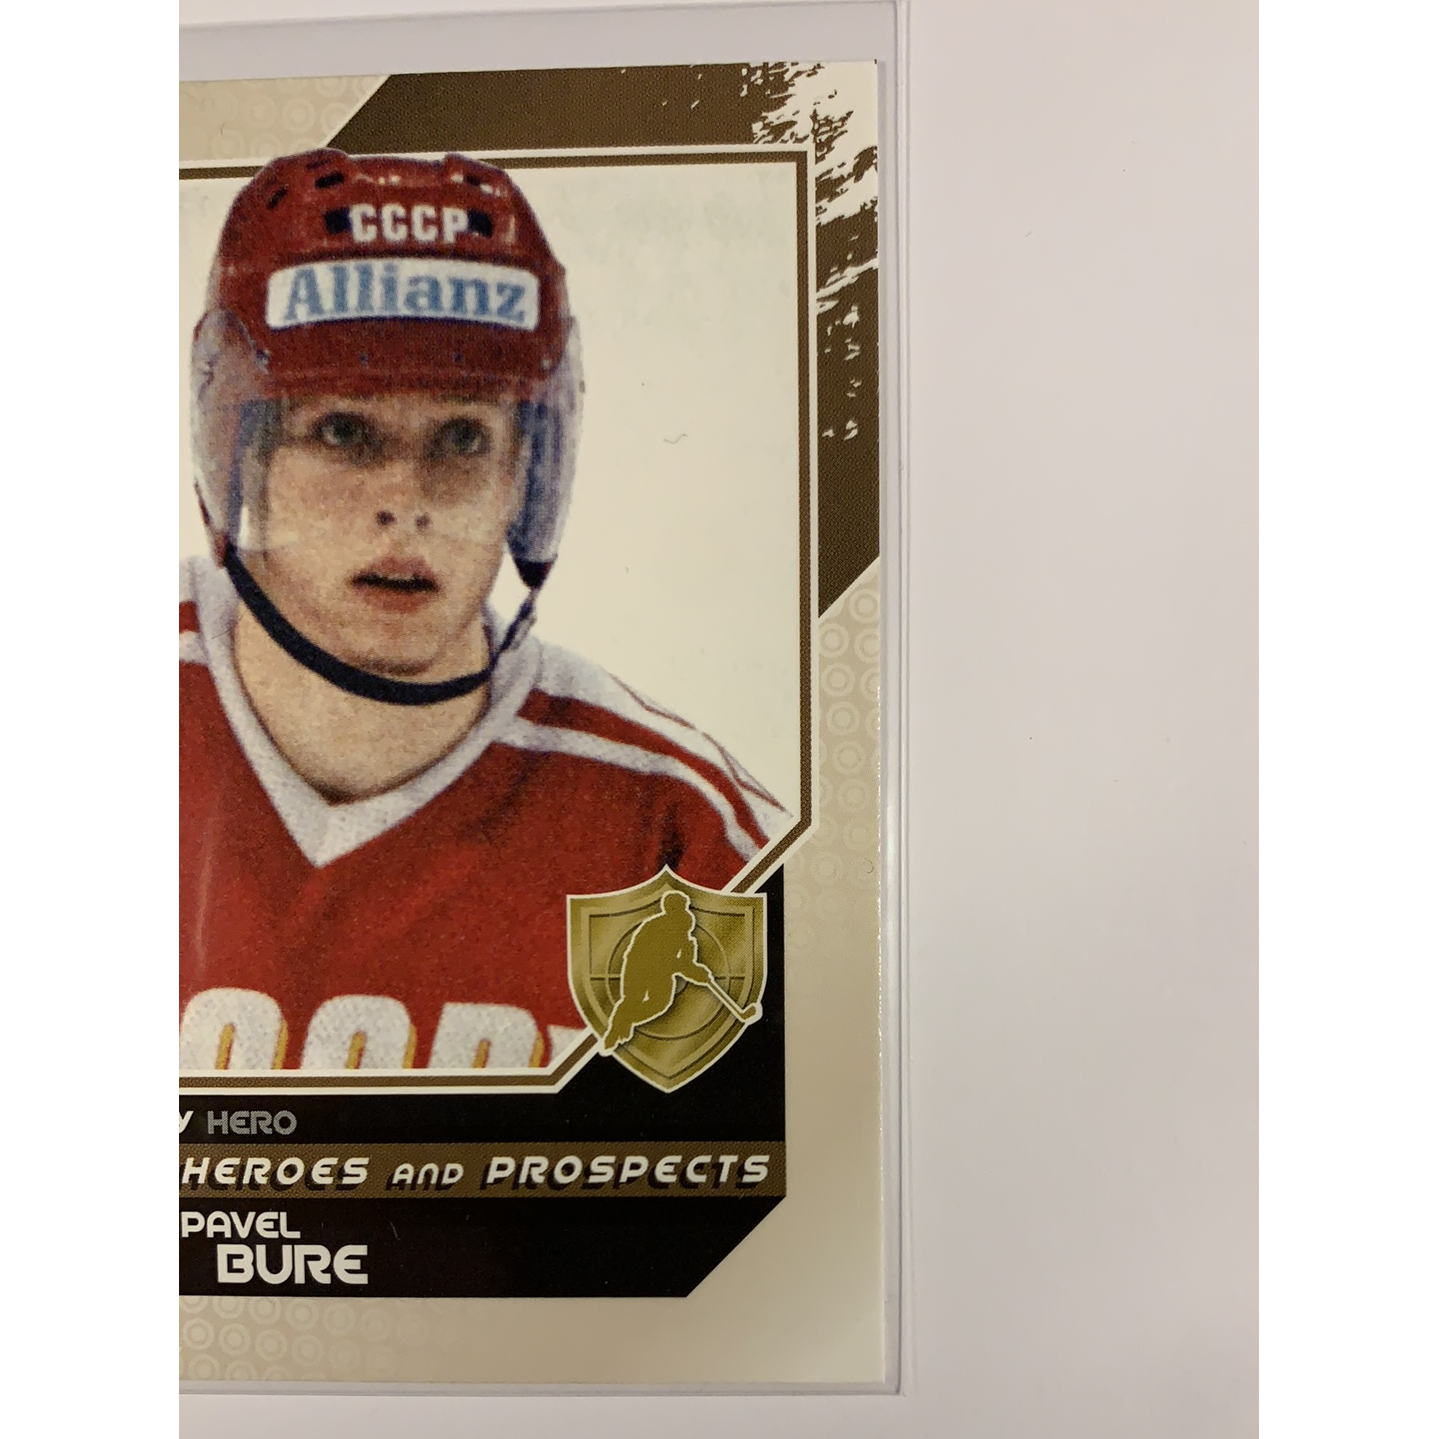  2011 In the Game Pavel Bure Heroes and Prospects  Local Legends Cards & Collectibles